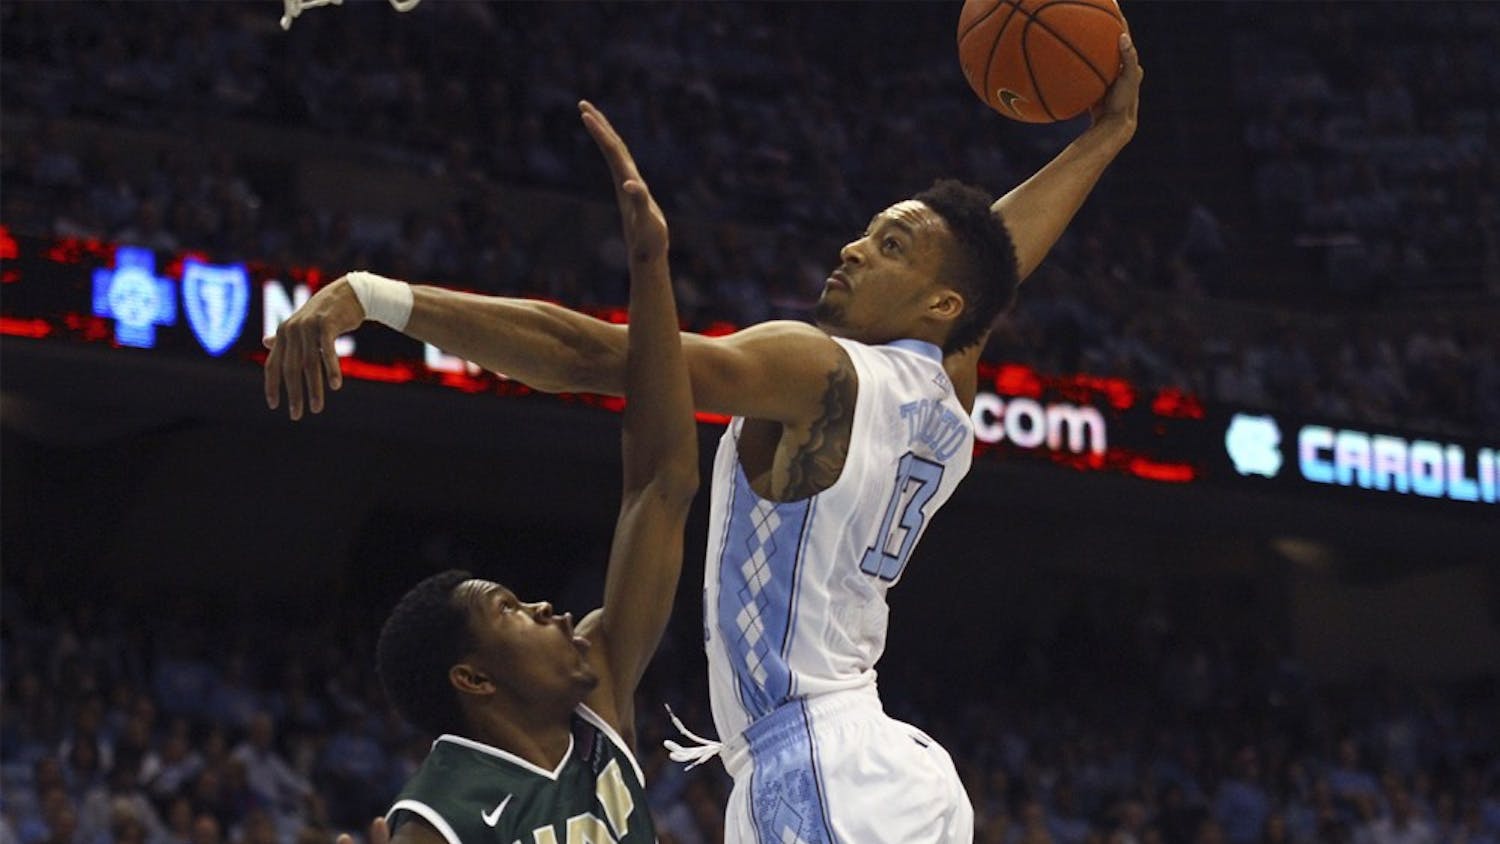 Forward J.P. Tokoto (13) makes the dunk during the win against UAB.